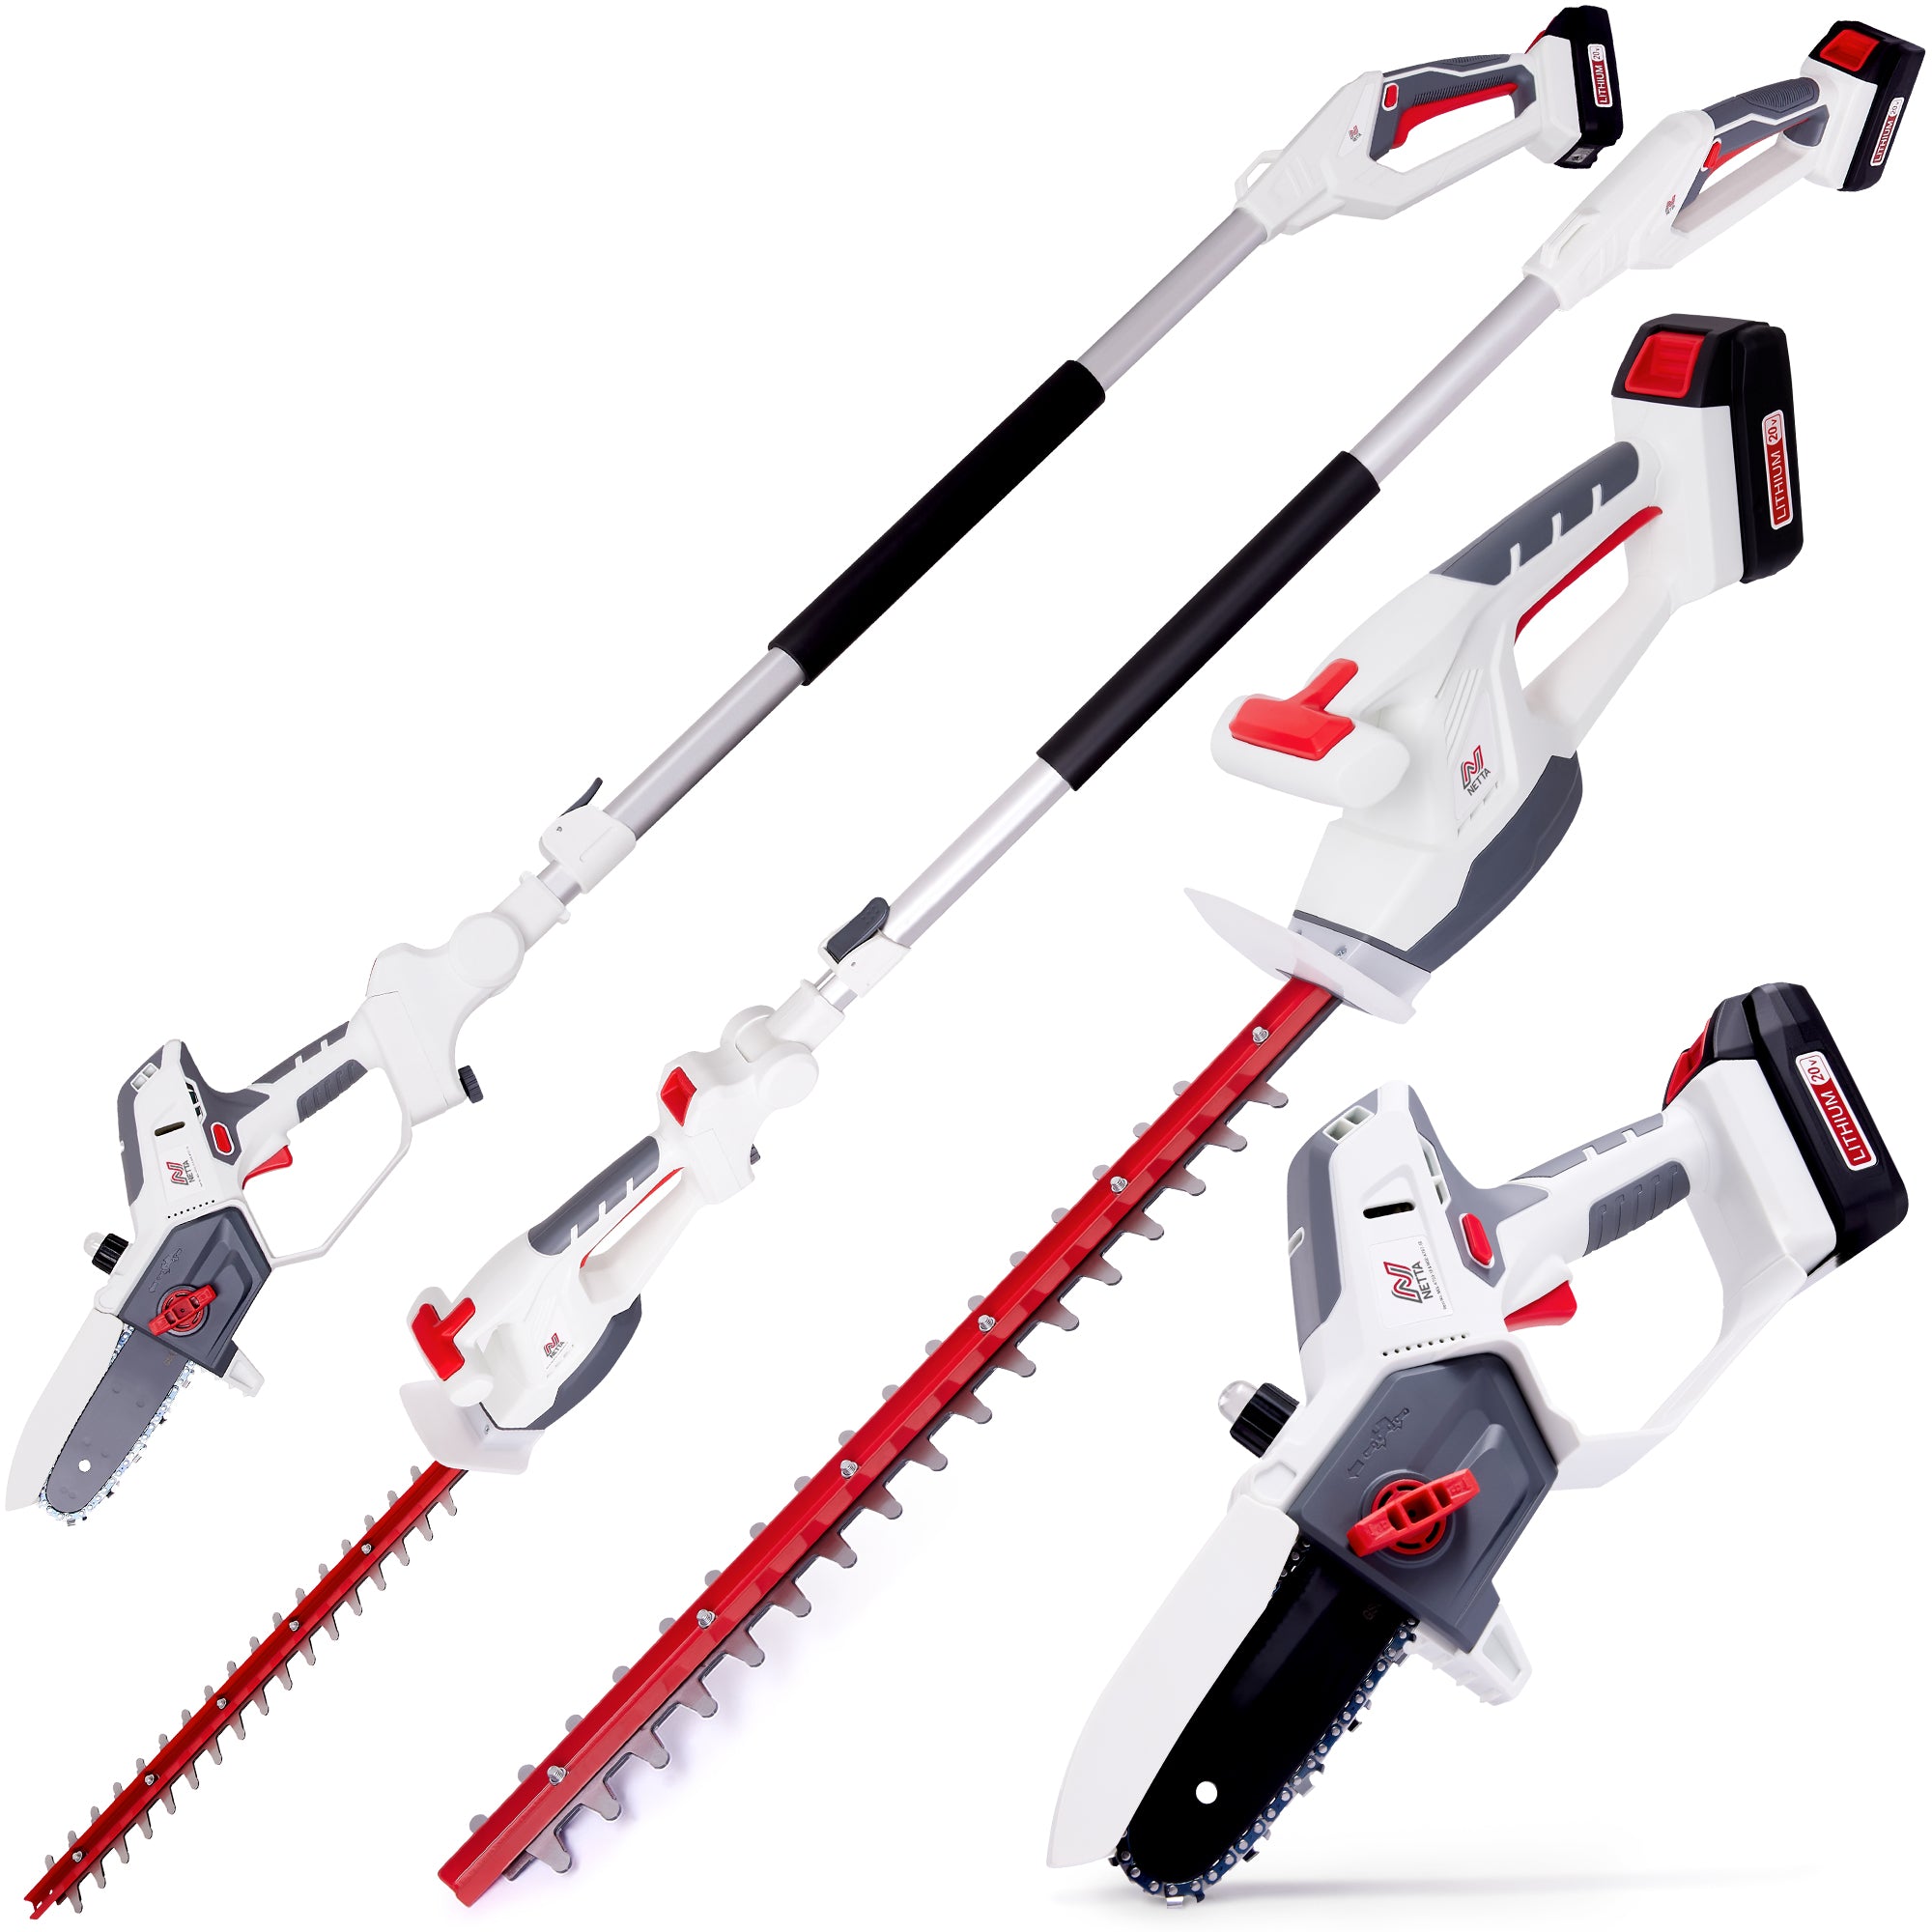 NETTA 20V Cordless 4-In-1 Pole & Handheld Hedge Trimmer and Chainsaw